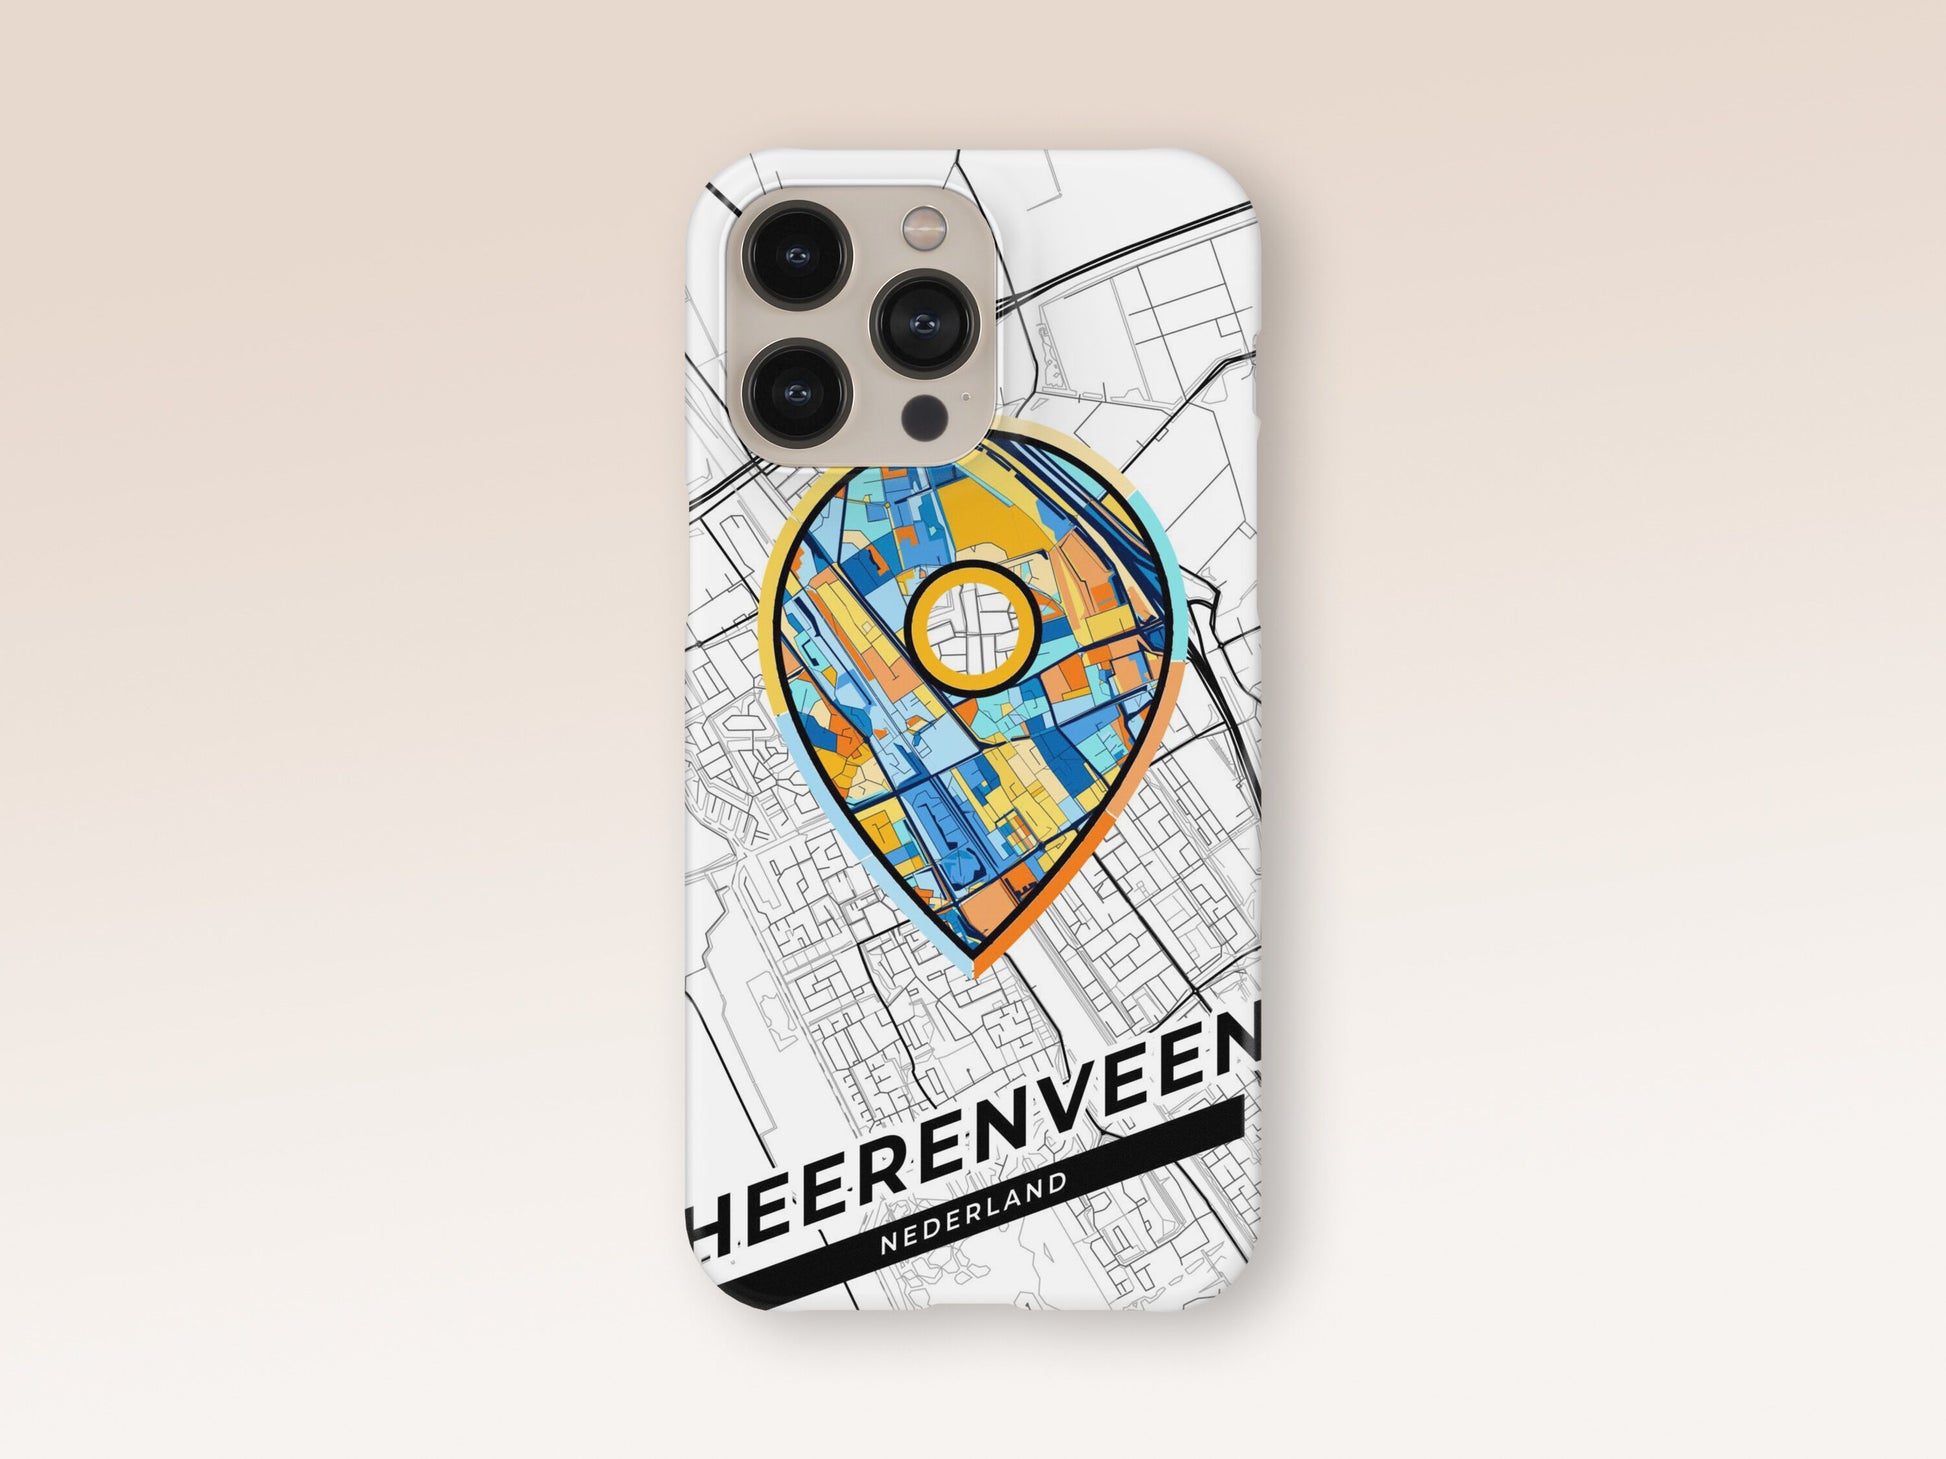 Heerenveen Netherlands slim phone case with colorful icon. Birthday, wedding or housewarming gift. Couple match cases. 1